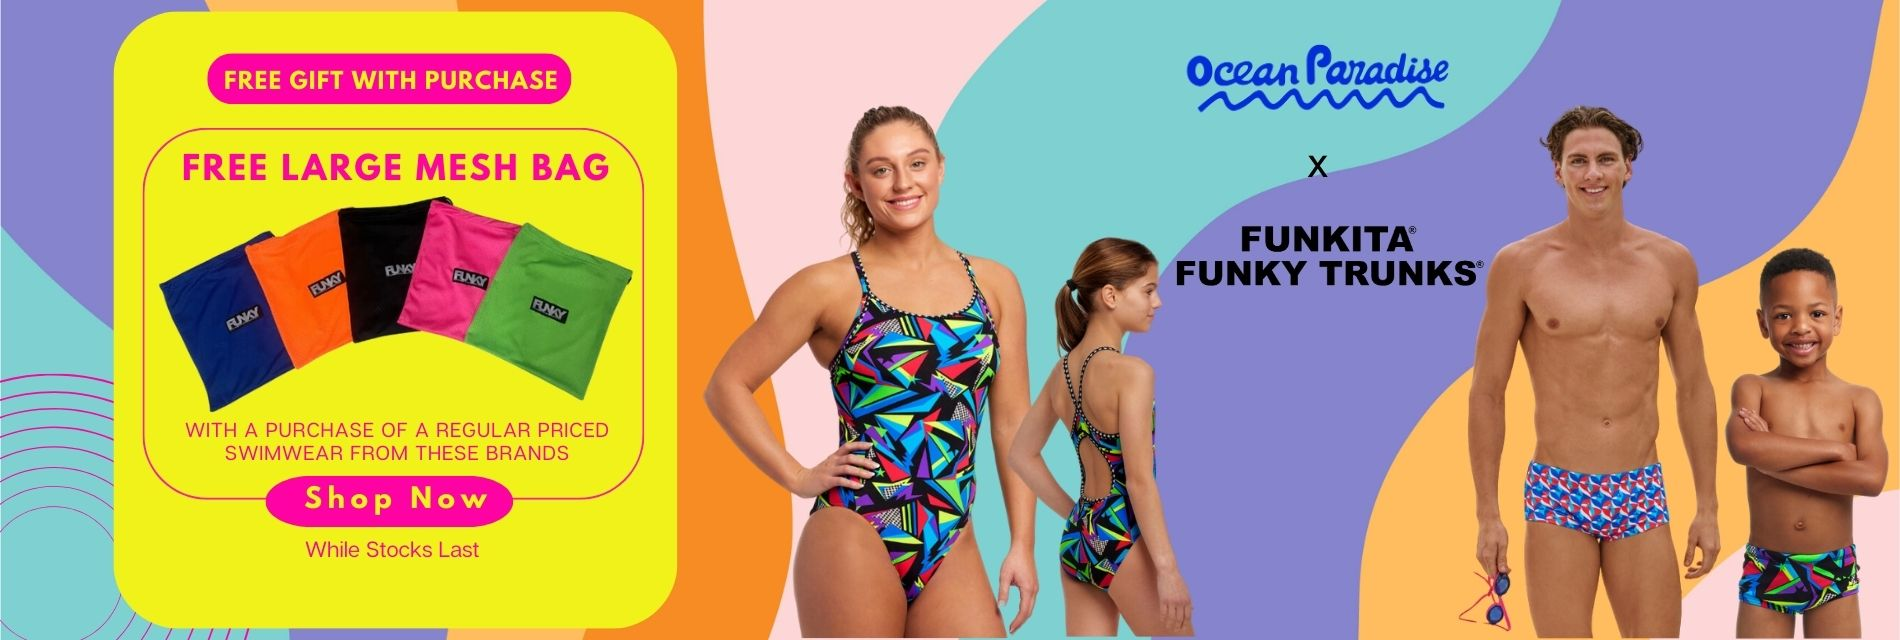 Funky Trunks Swimsuits Free Gift Promotion